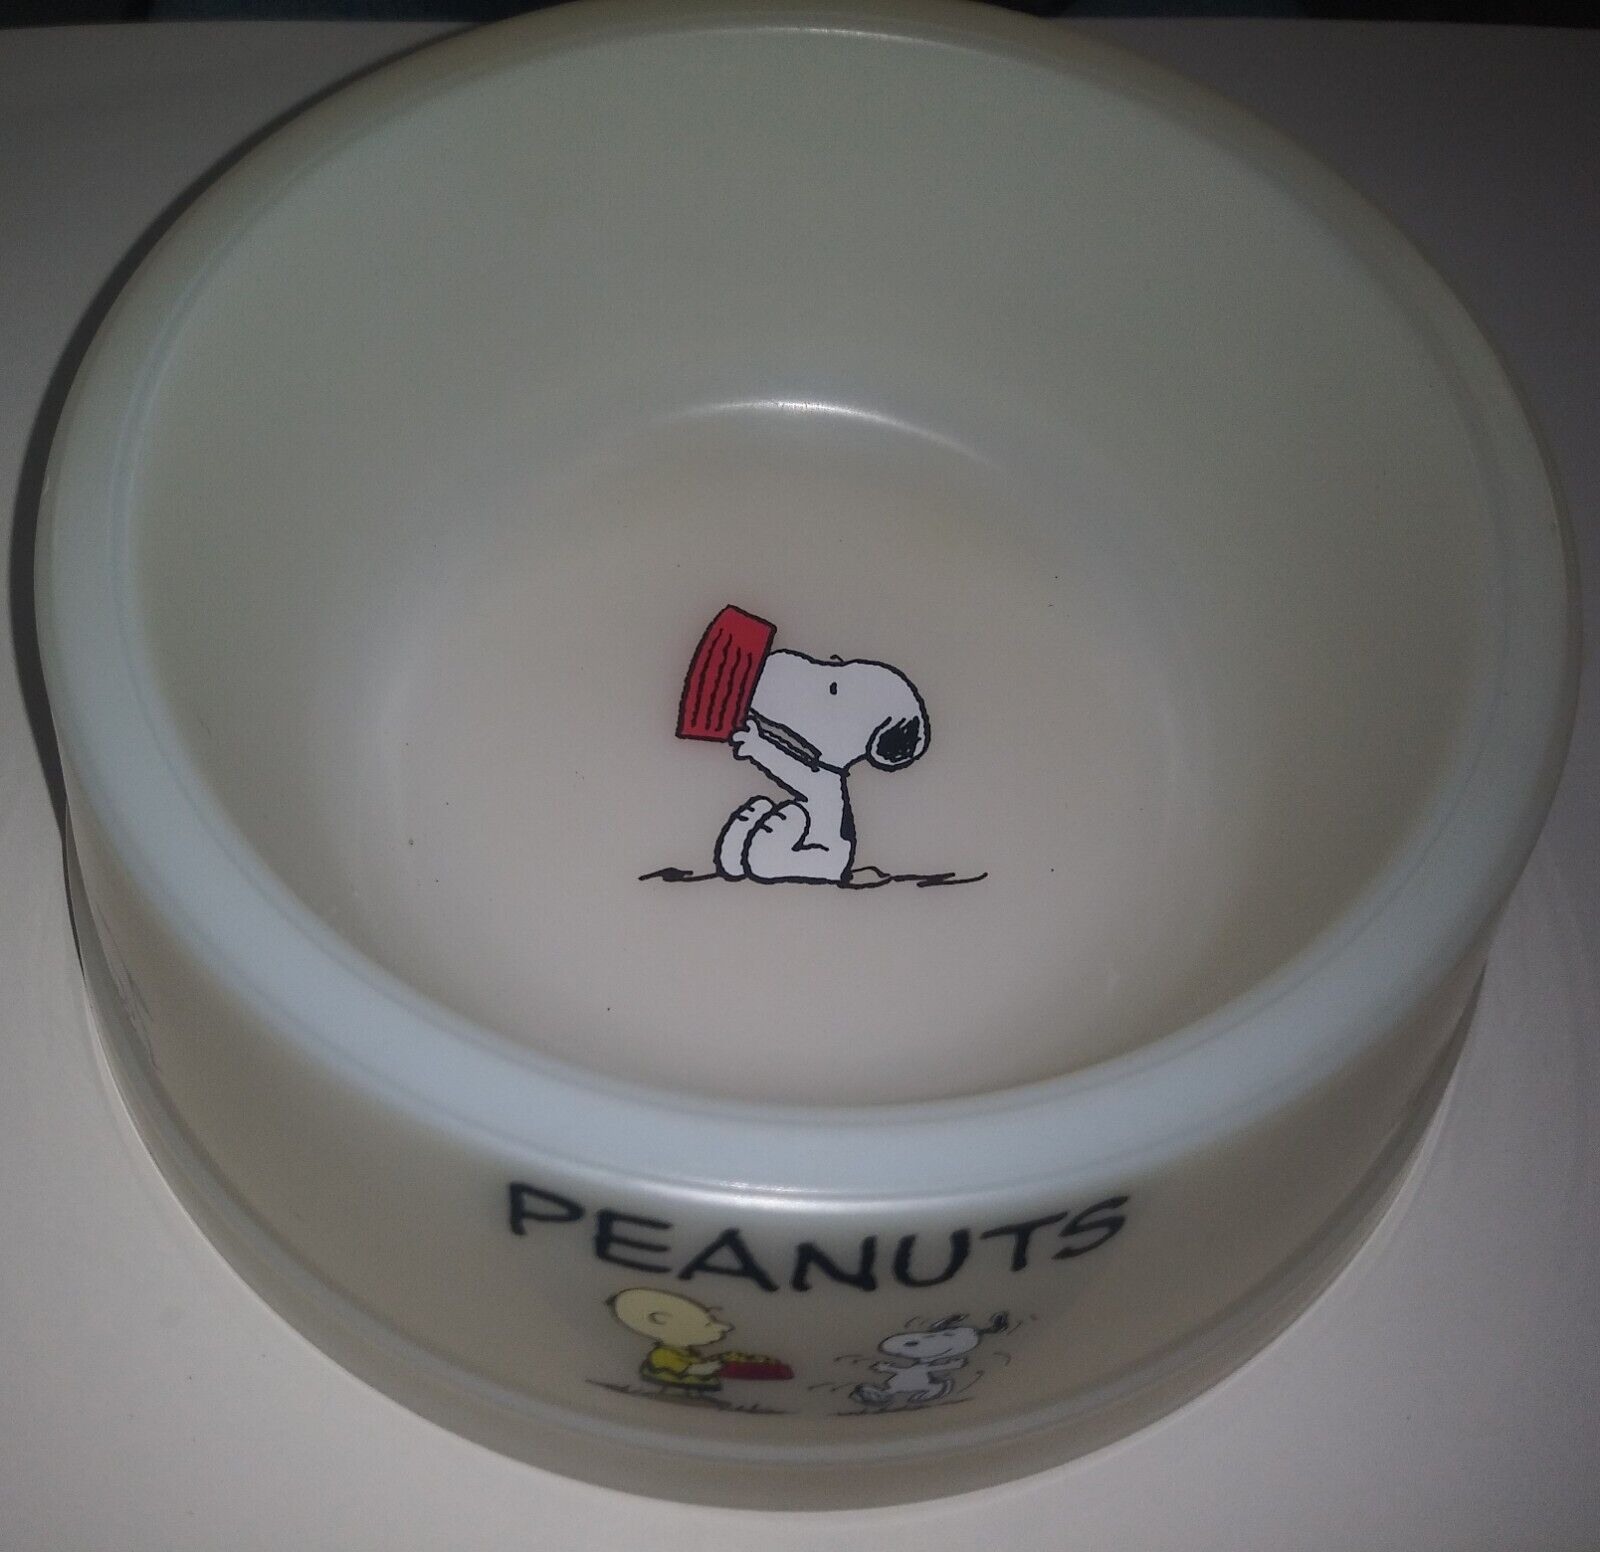 Vintage Peanuts Snoopy Plastic Dish / Bowl NEVER BEEN USED as dog dish